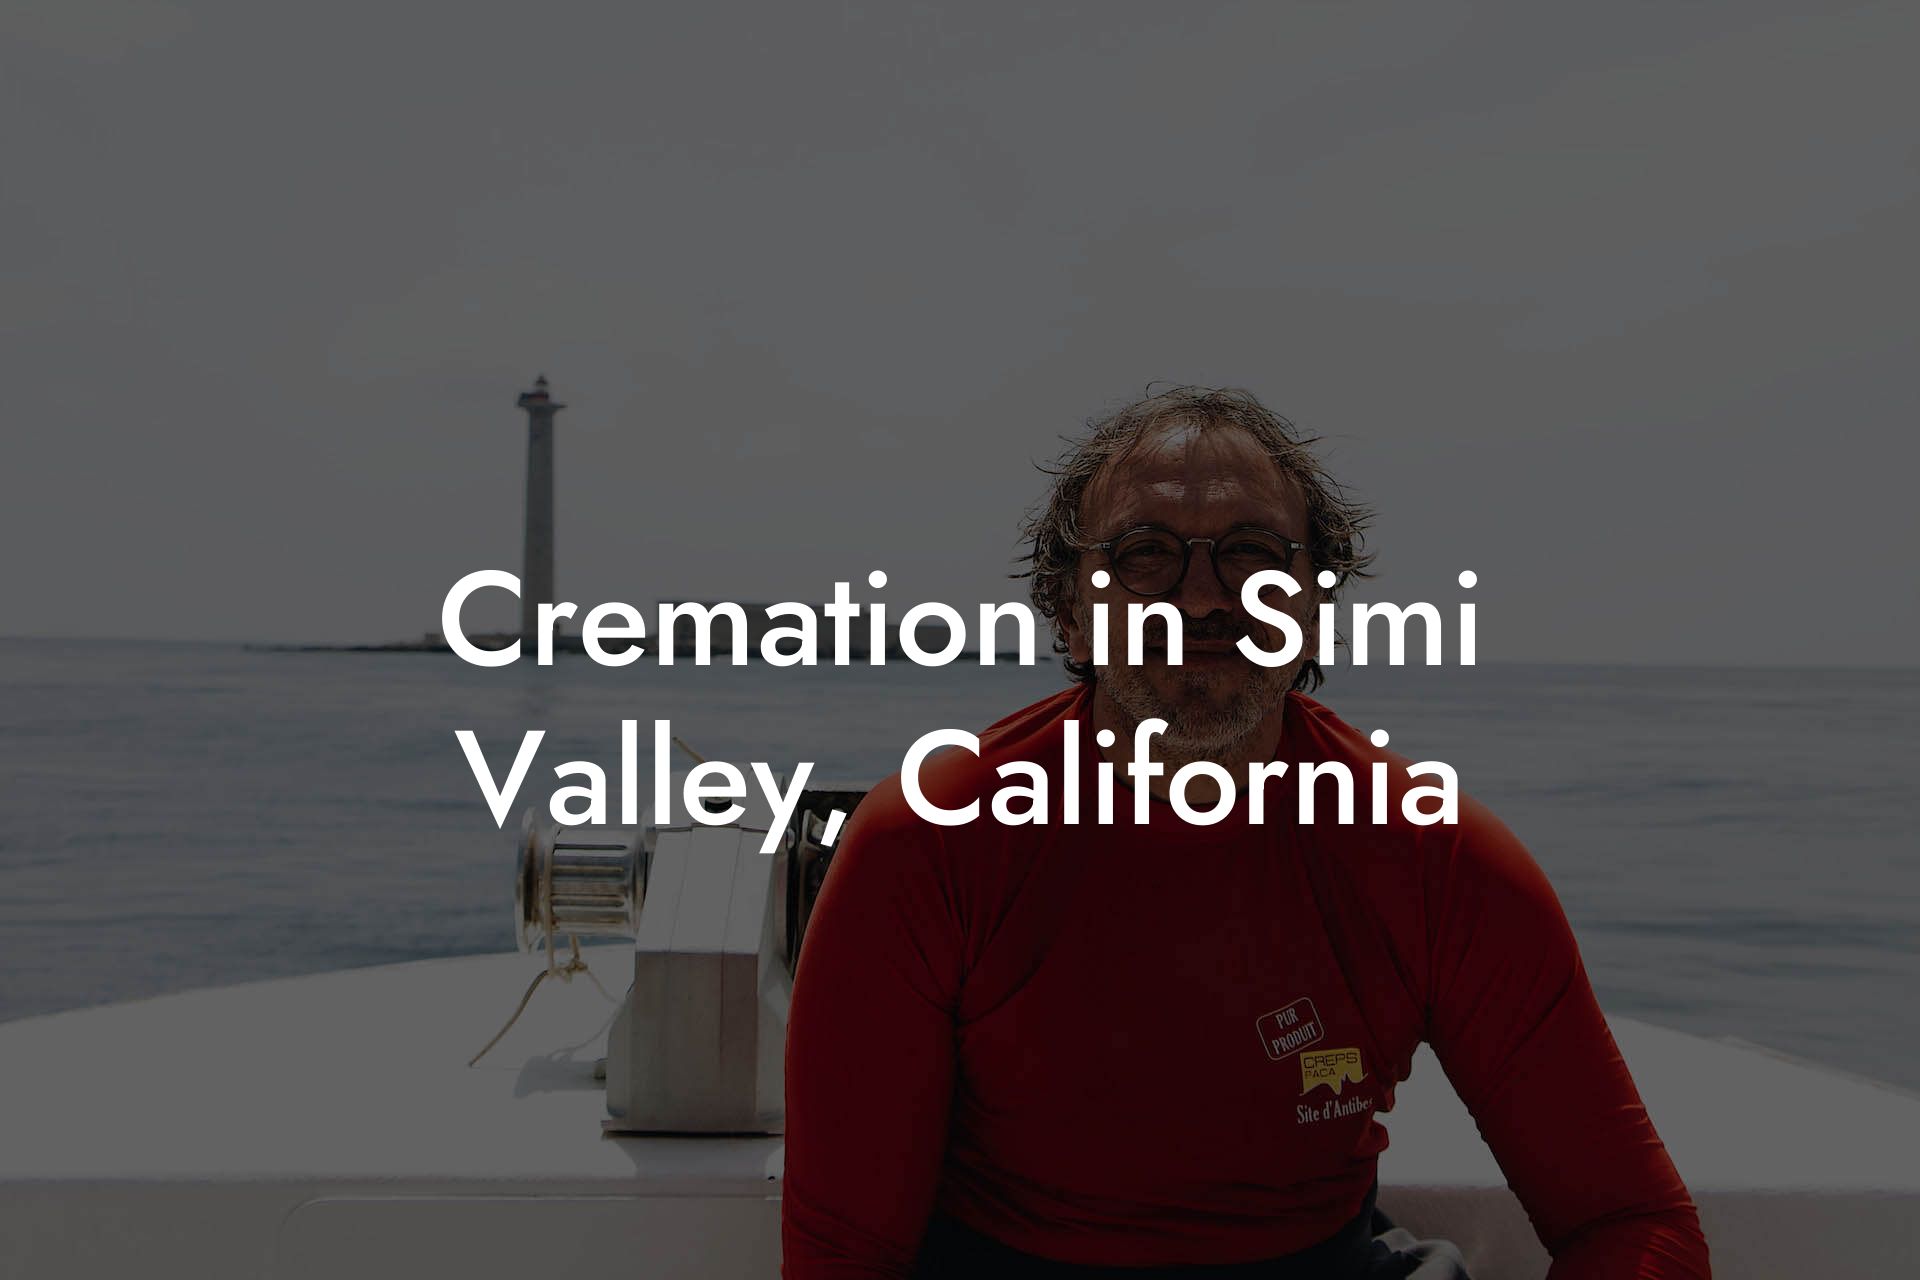 Cremation in Simi Valley, California